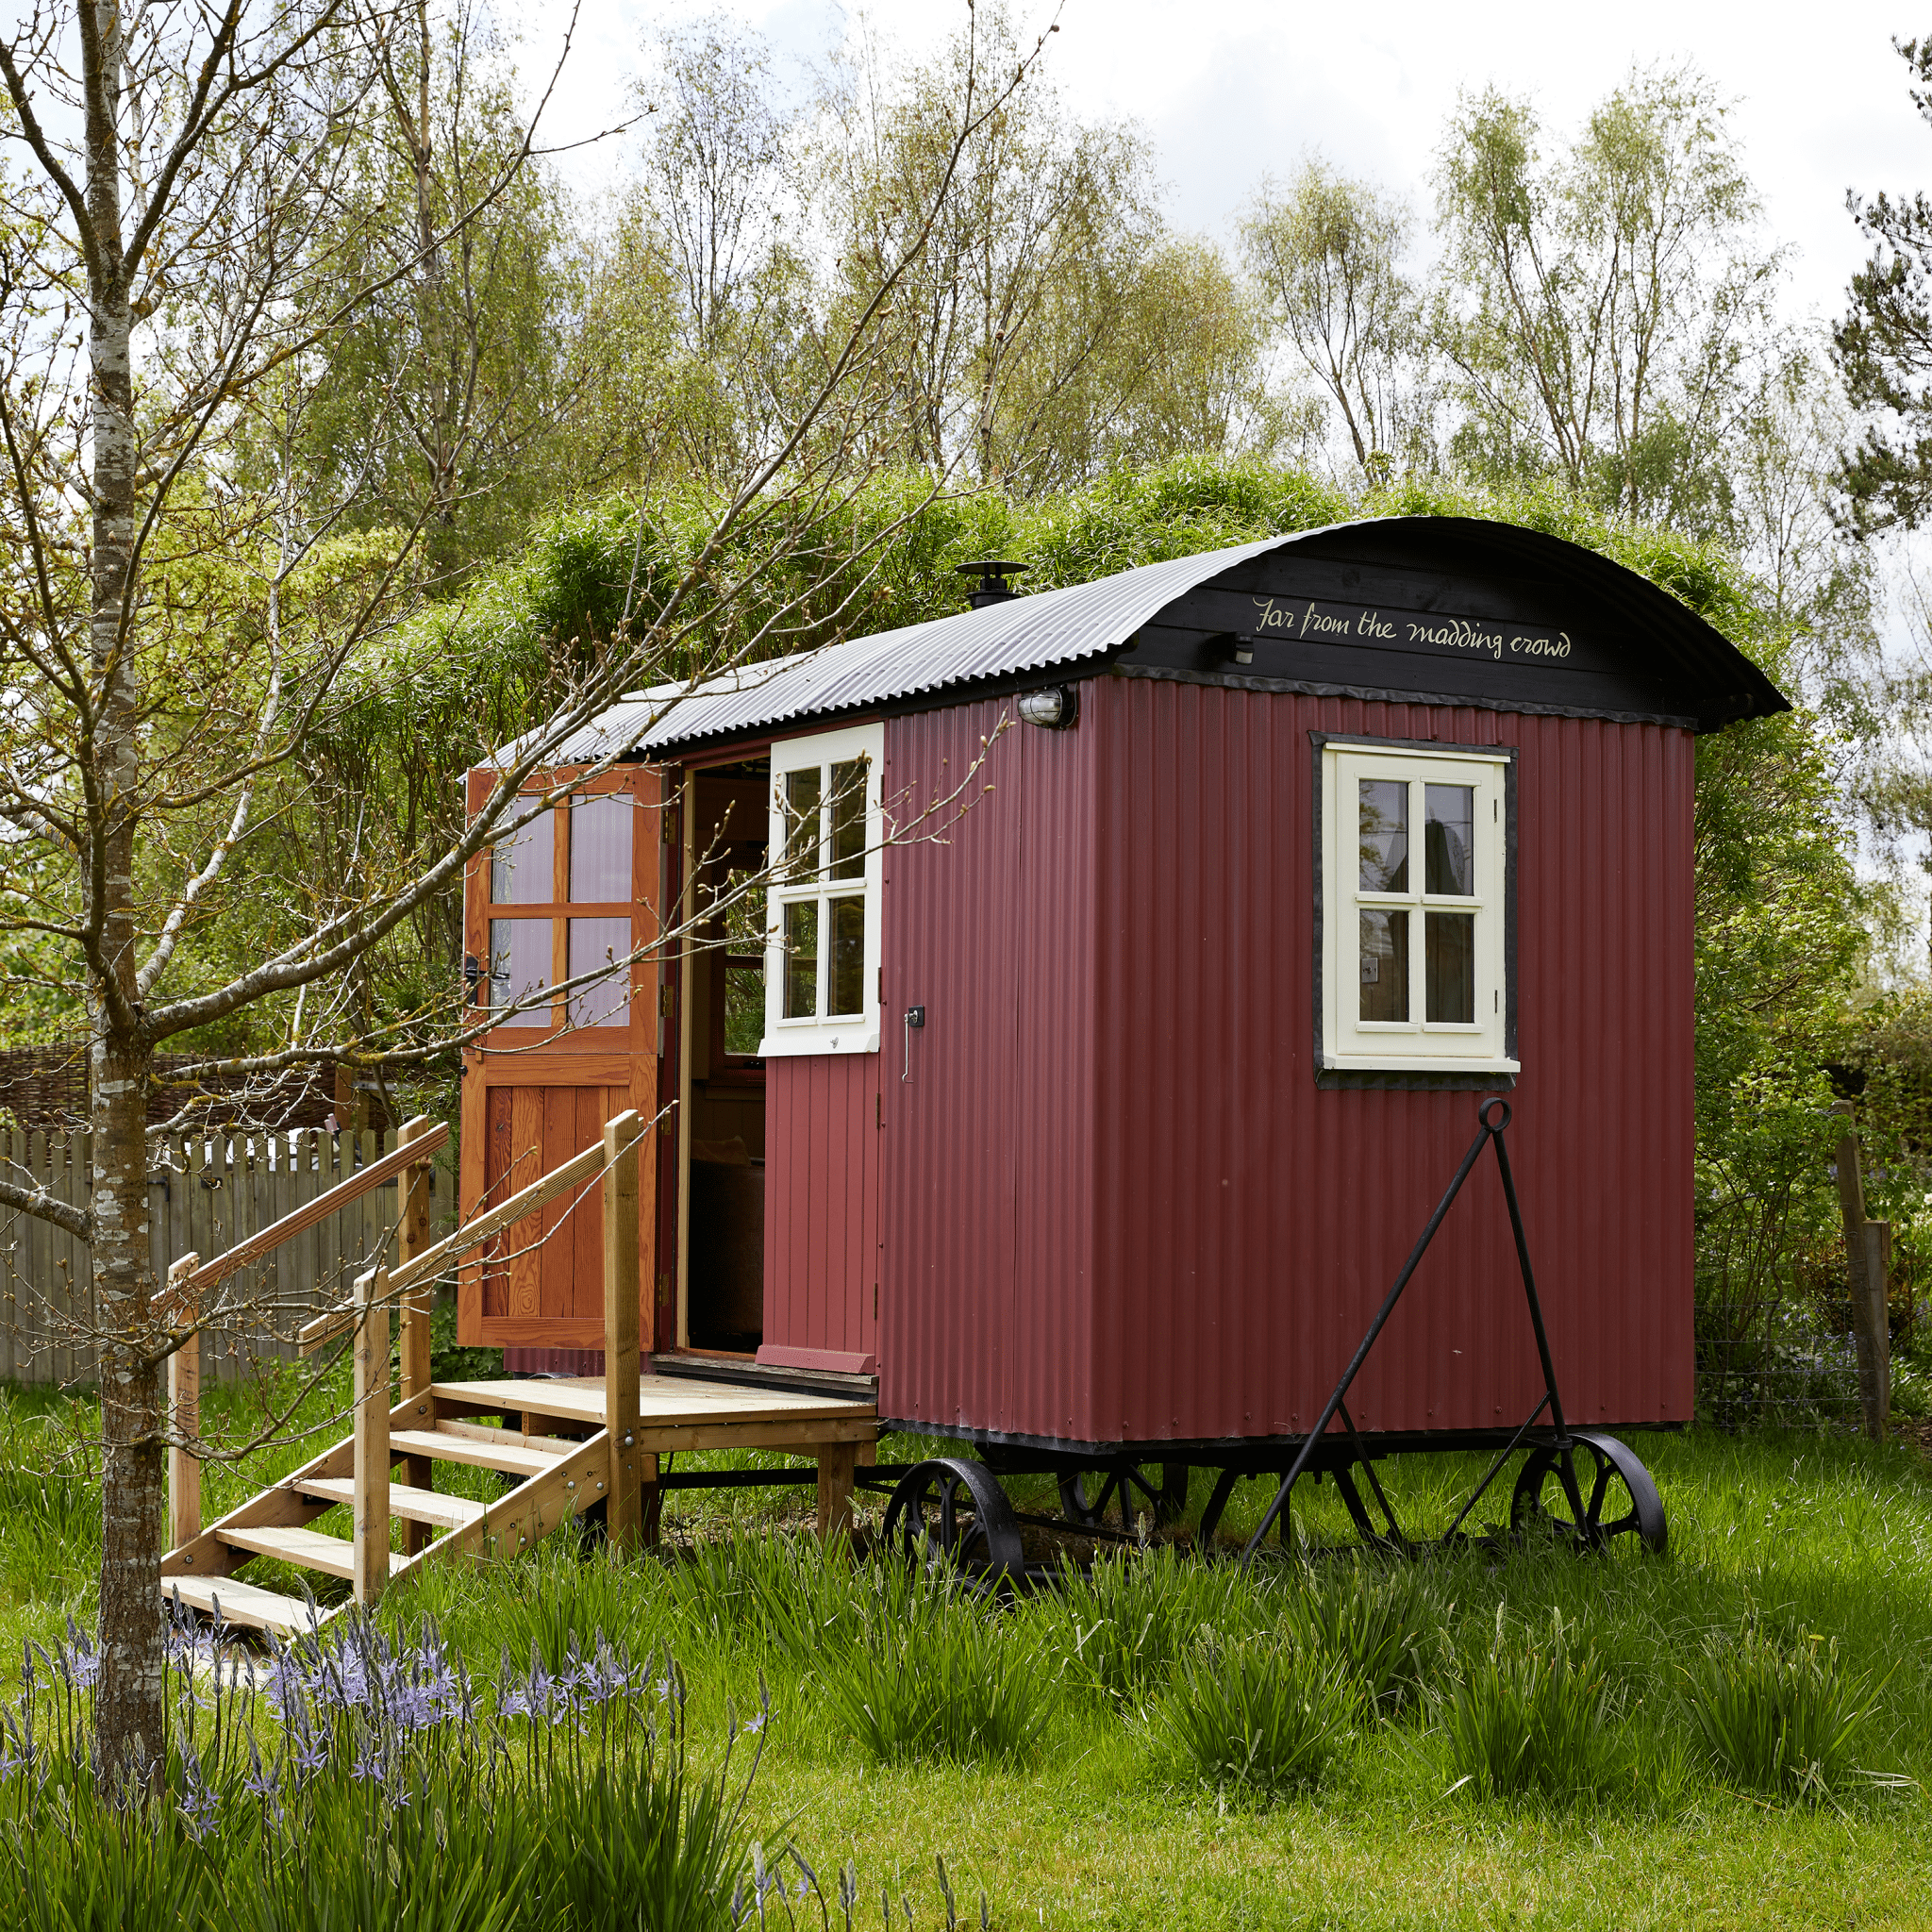 The story of the shepherd's hut - Life of Riley